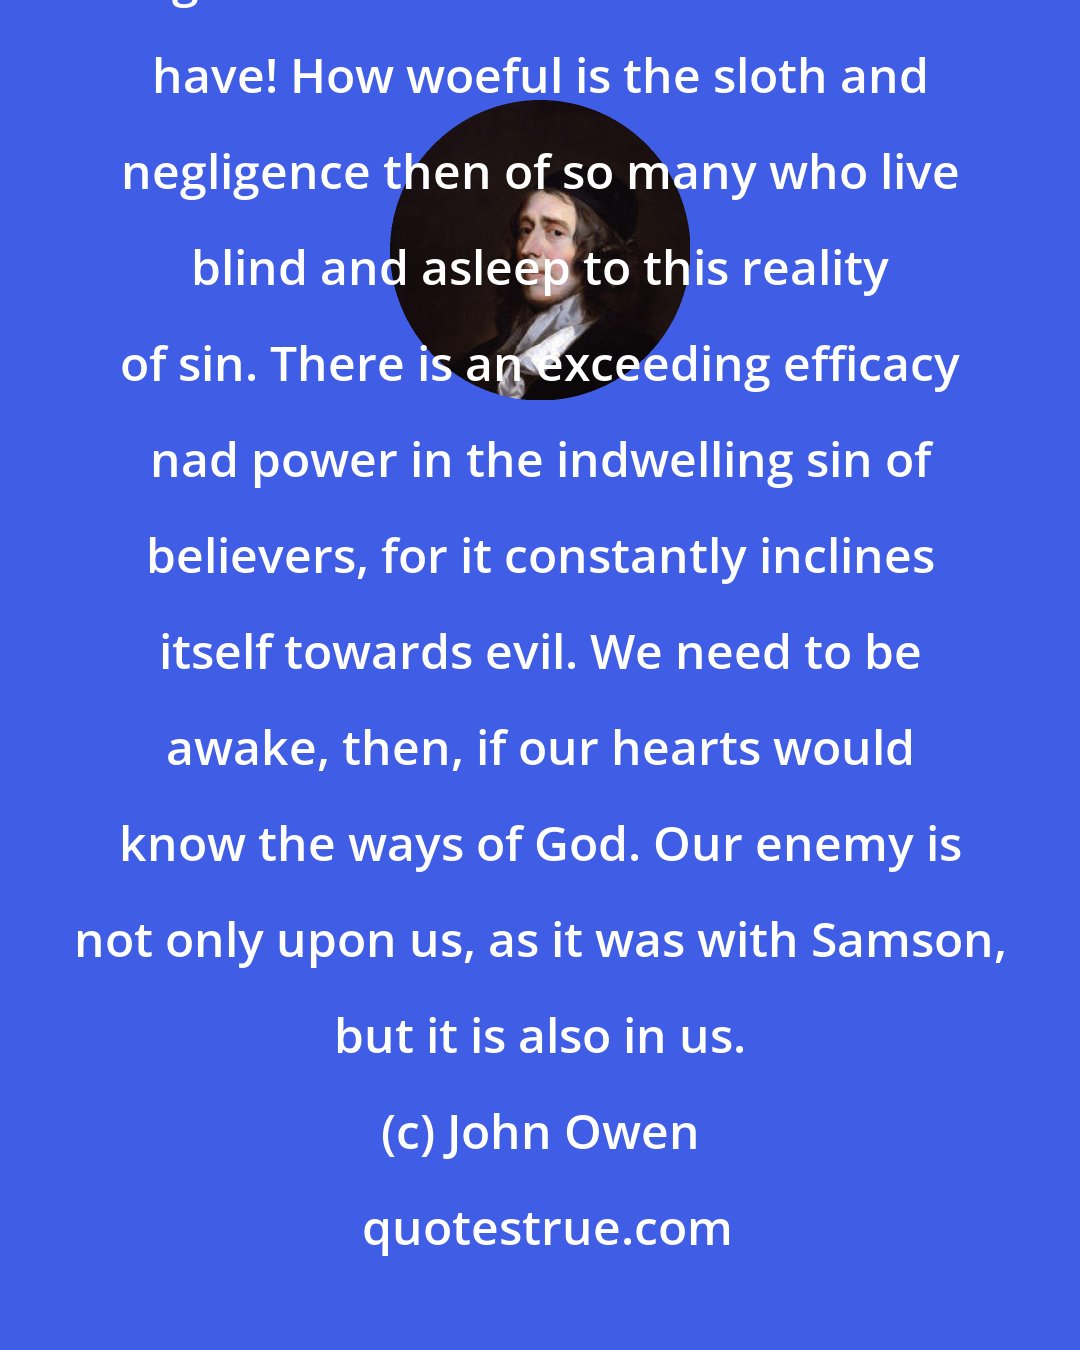 John Owen: When we realize a constant enemy of the soul abides within us, what diligence and watchfulness we should have! How woeful is the sloth and negligence then of so many who live blind and asleep to this reality of sin. There is an exceeding efficacy nad power in the indwelling sin of believers, for it constantly inclines itself towards evil. We need to be awake, then, if our hearts would know the ways of God. Our enemy is not only upon us, as it was with Samson, but it is also in us.